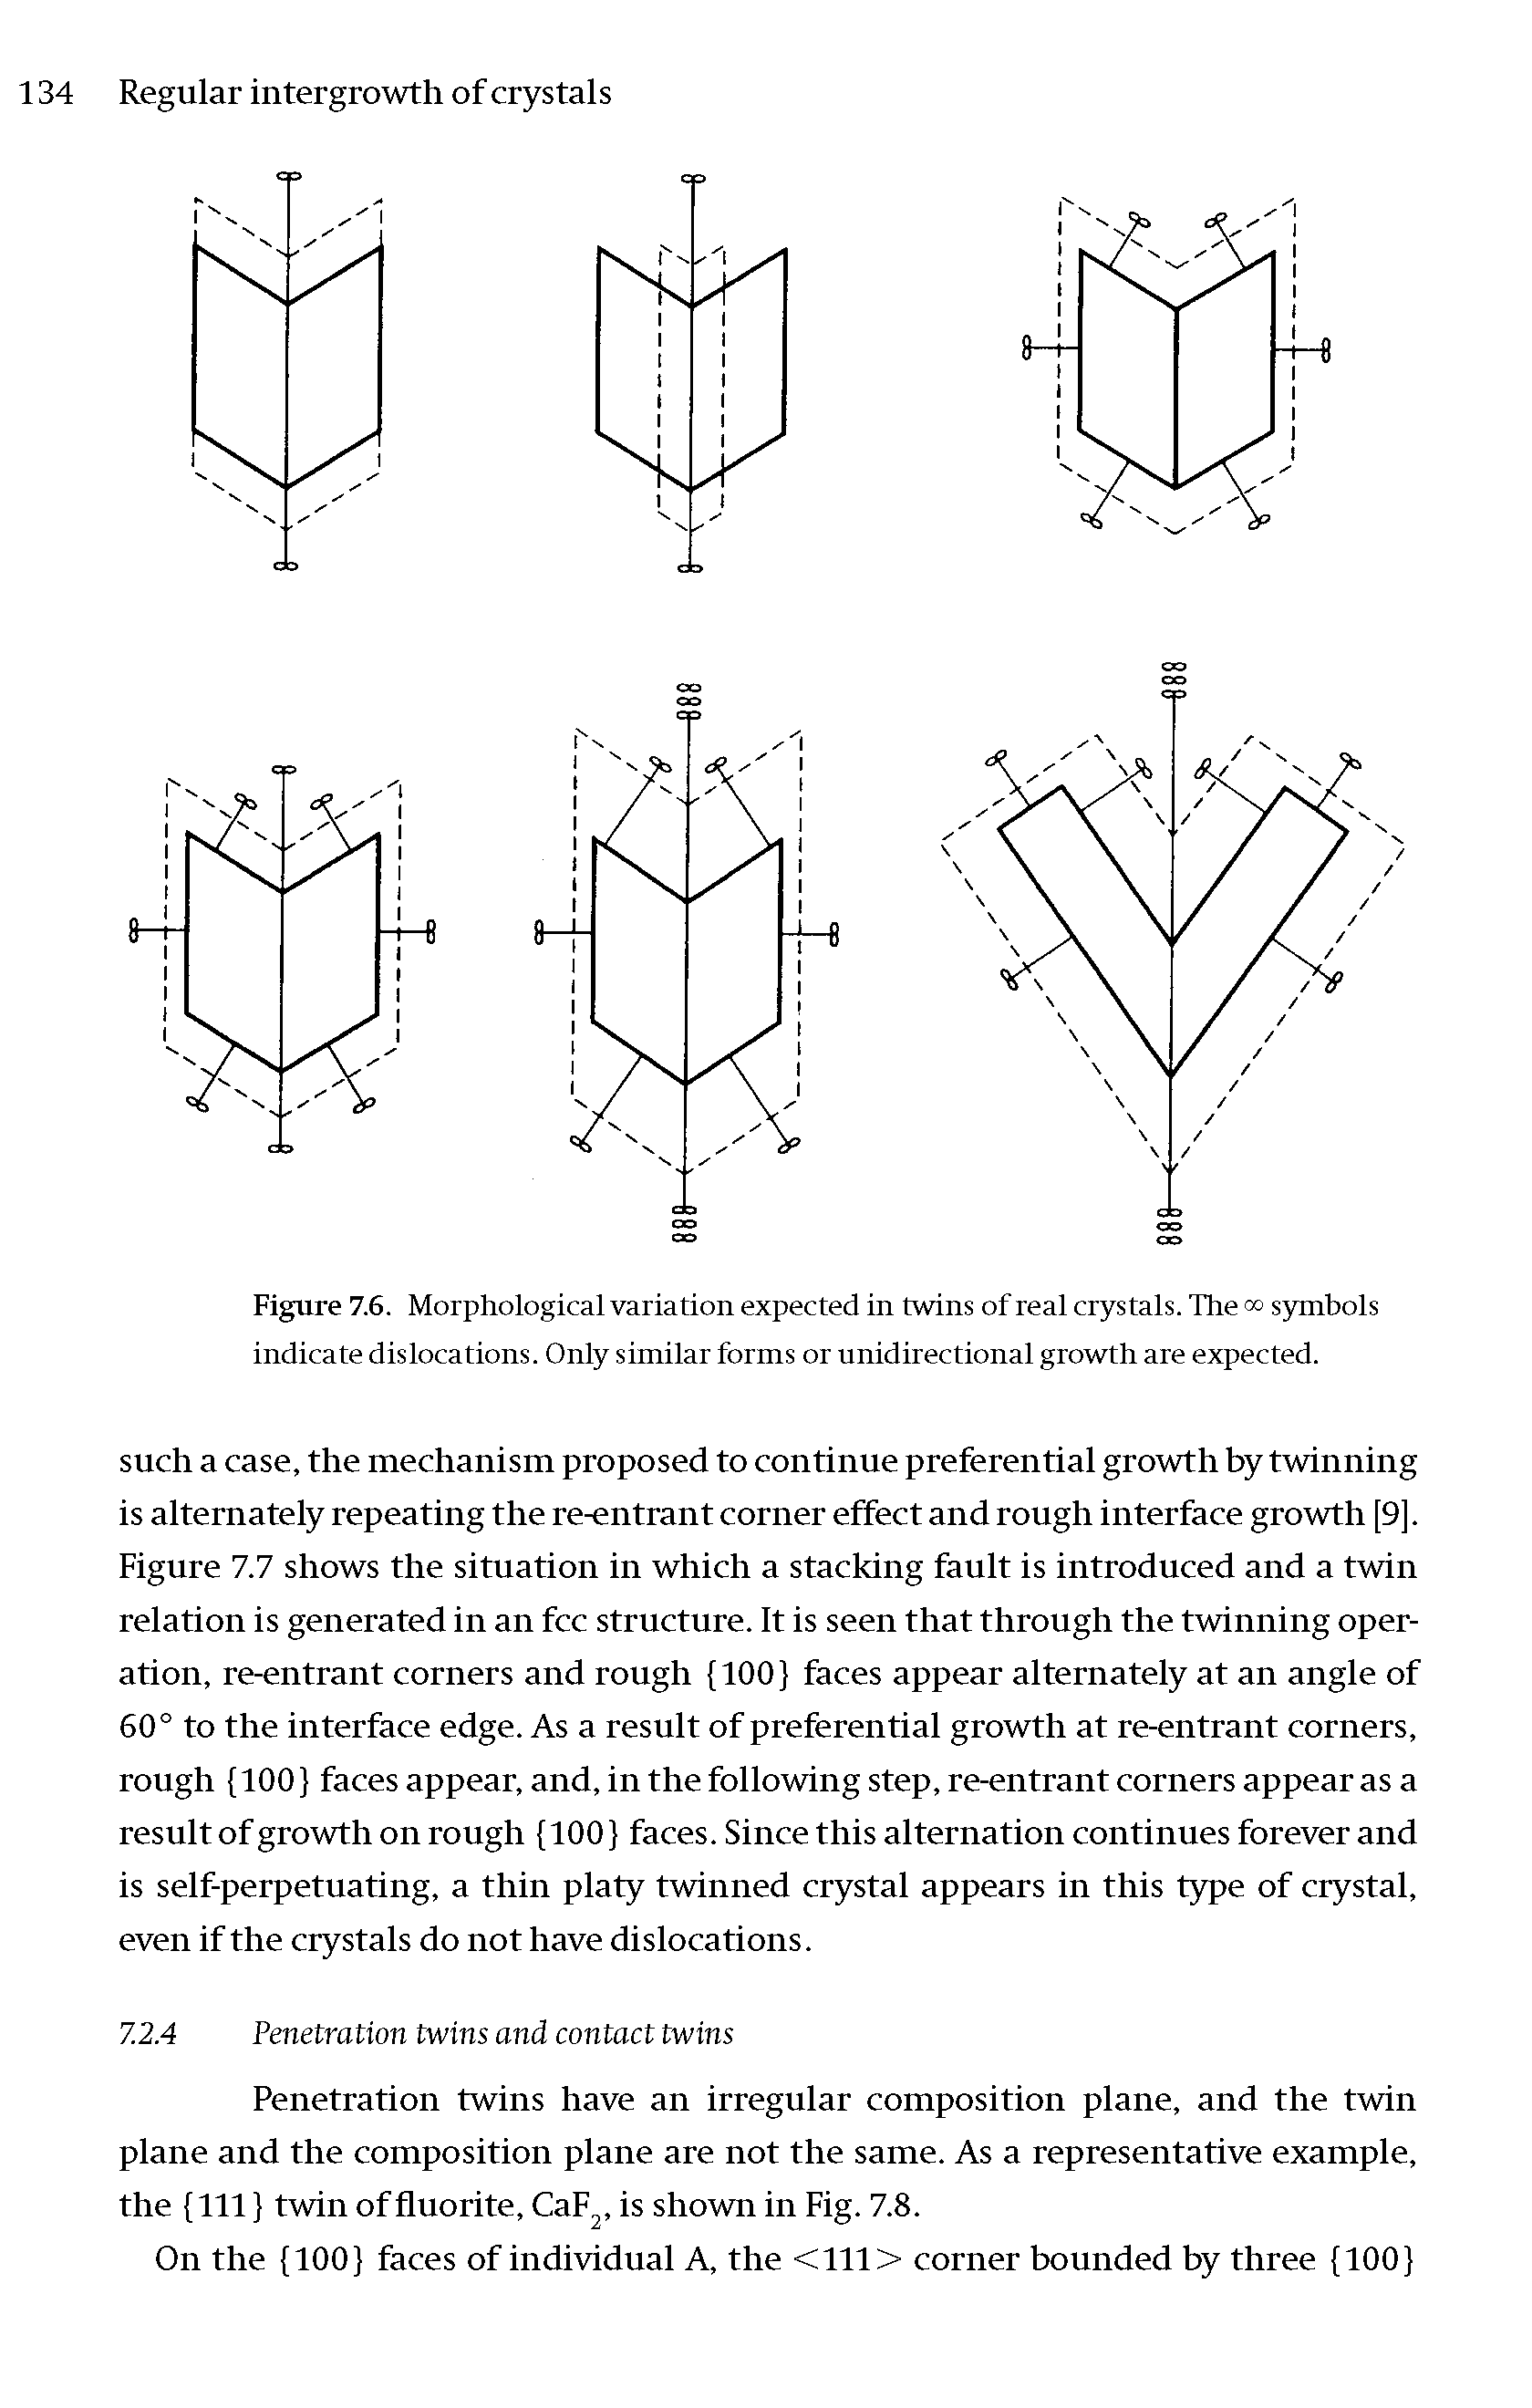 Figure 7.6. Morphological variation expected in twins of real crystals. The symbols indicate dislocations. Only similar forms or unidirectional growth are expected.